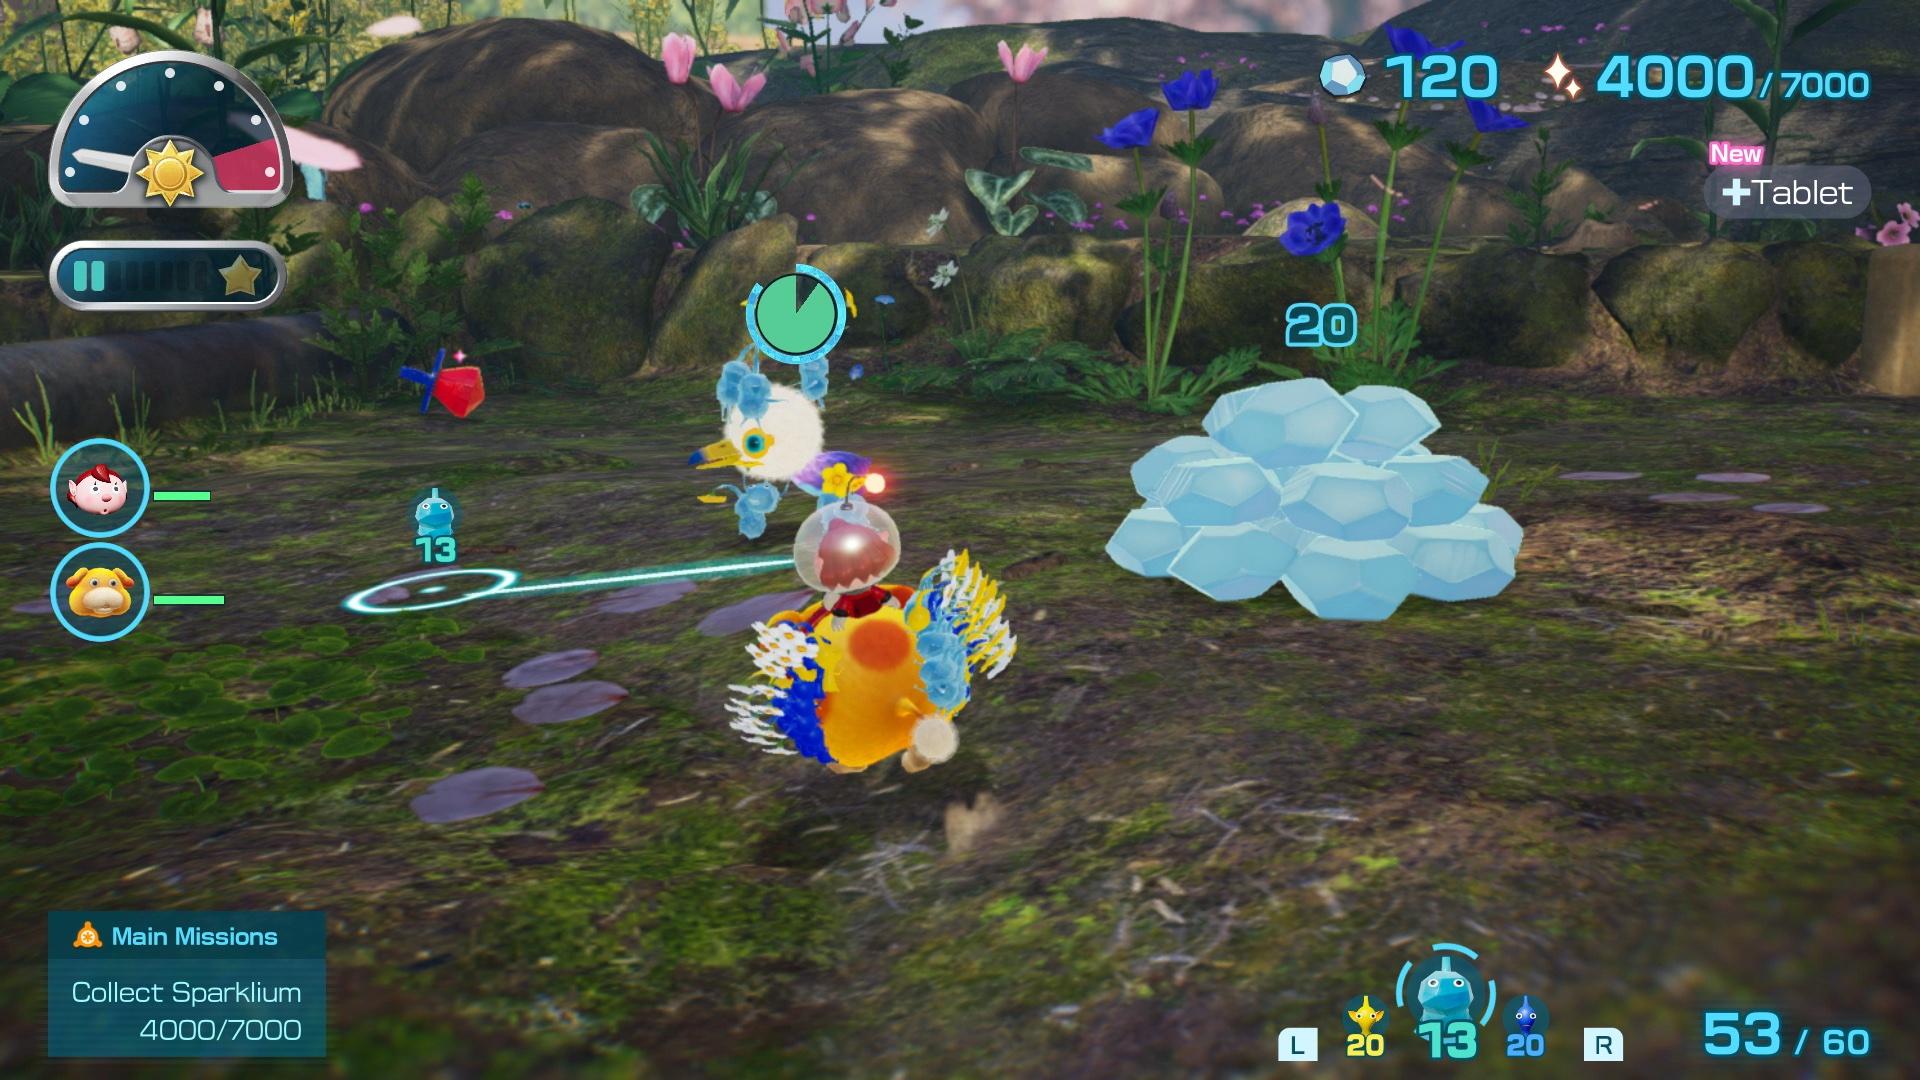 Pikmin and the player riding Oatchi in 'Pikmin 4'